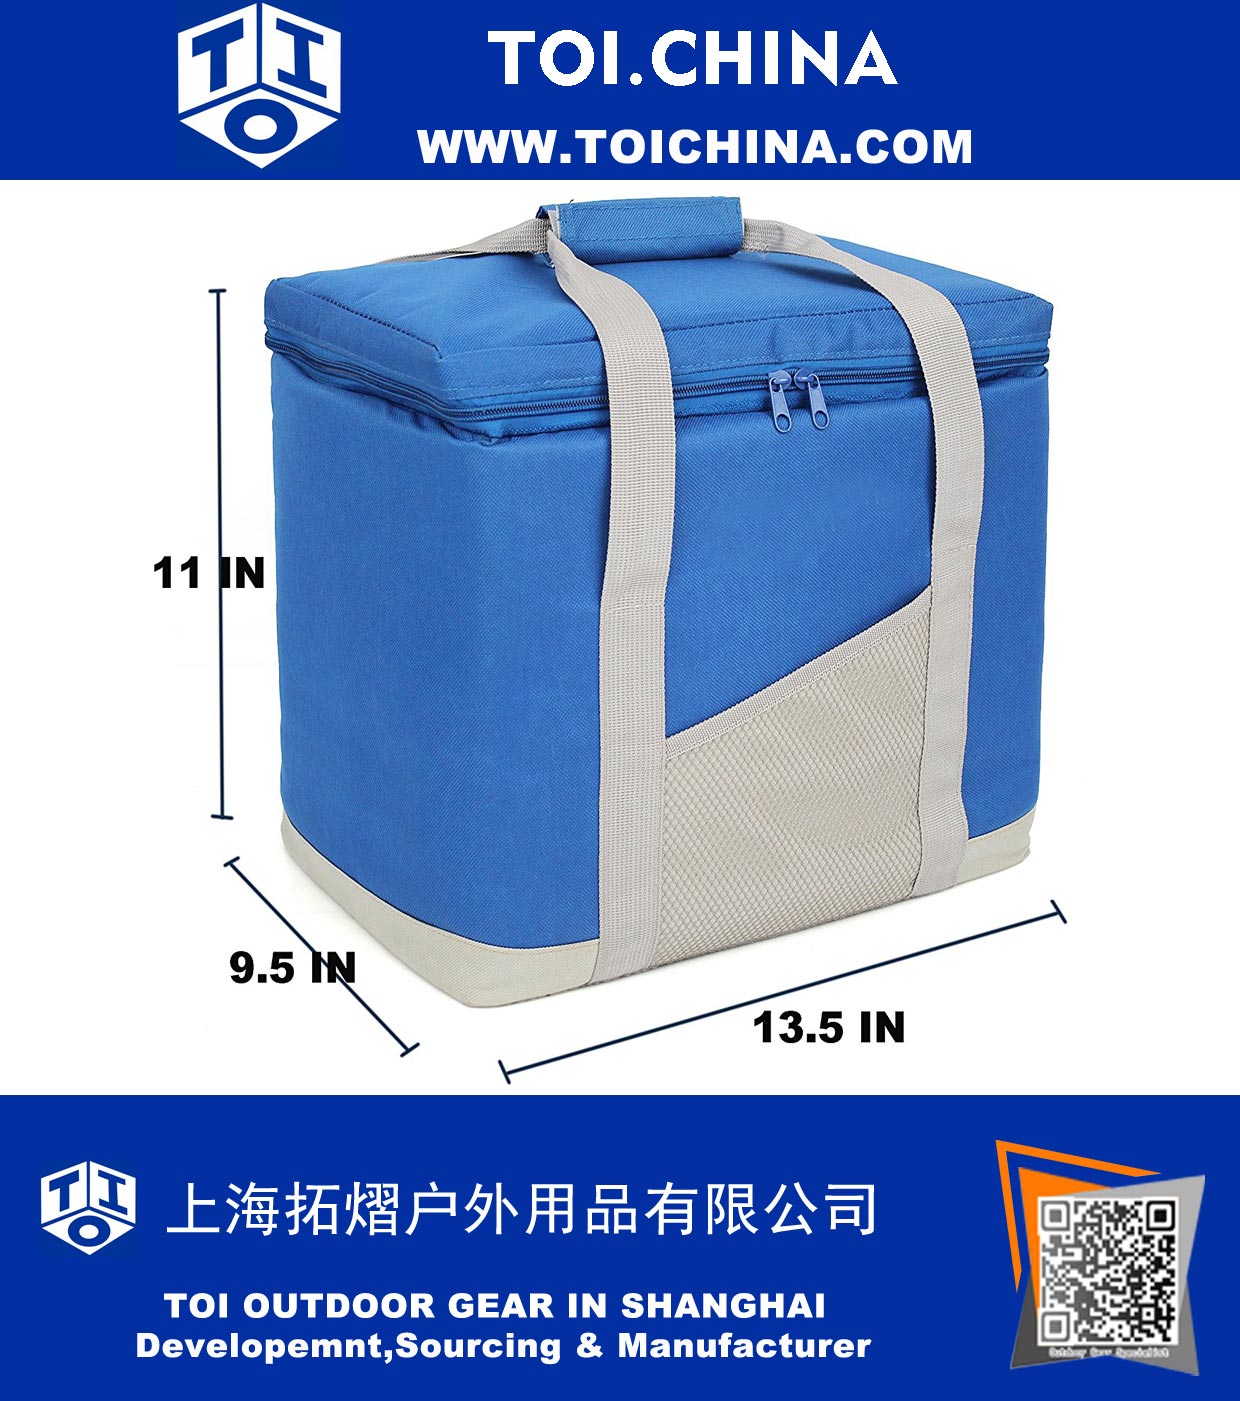 Water Proof 30 Can Large Insulated Lunch Cooler Bag Reusable Foldable Thermal Grocery Tote Bag with handle, Blue